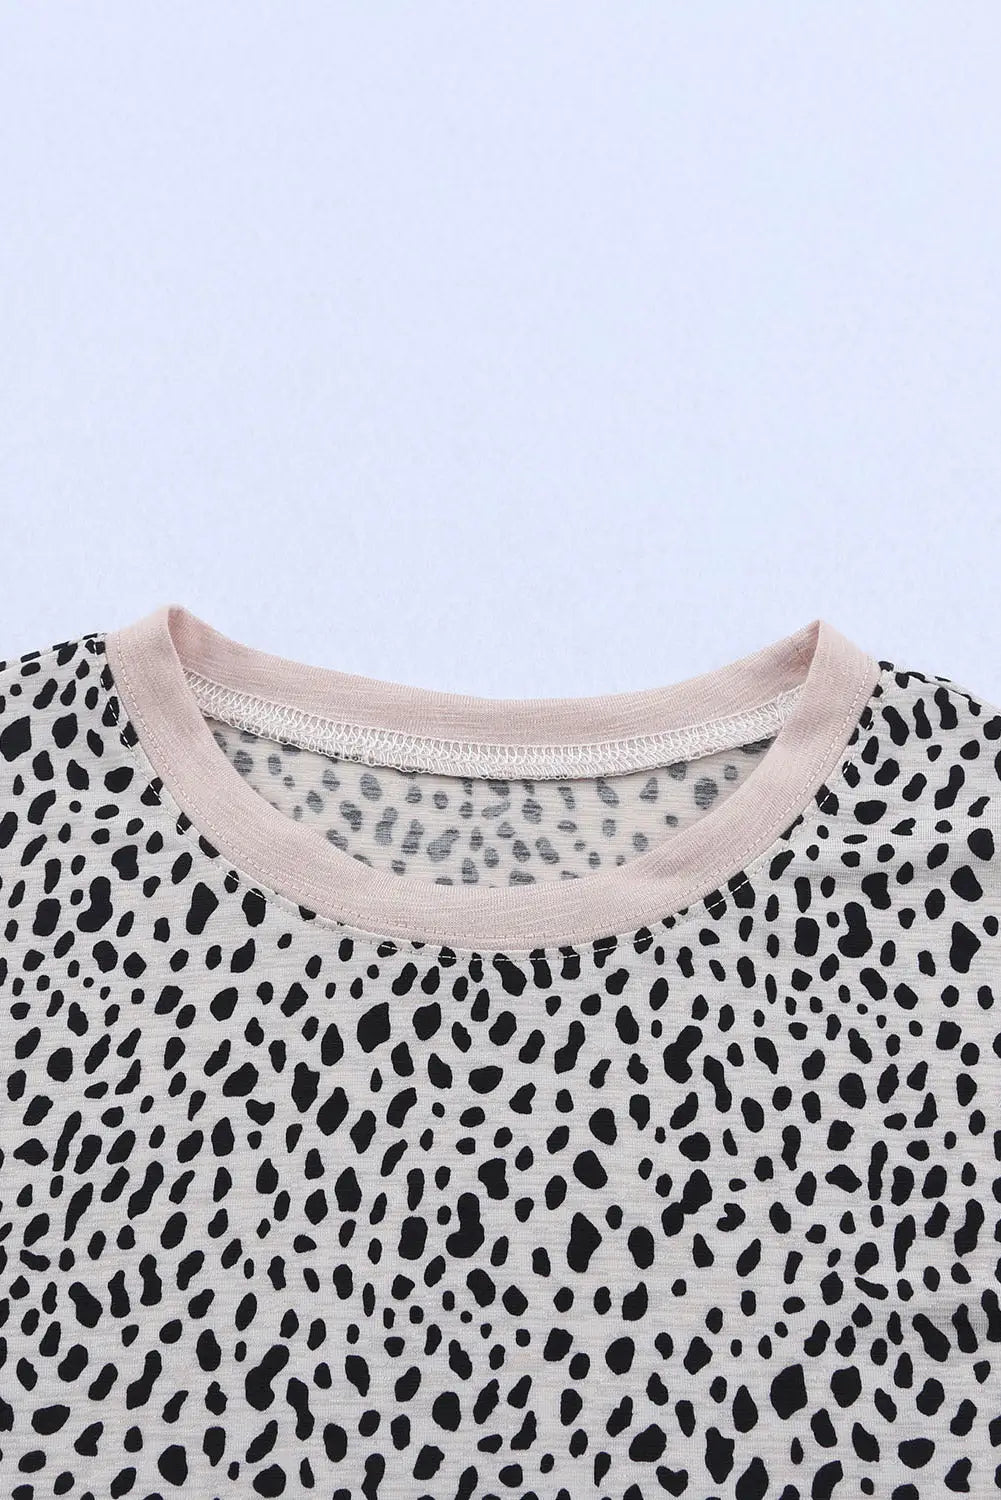 Animal spotted print round neck long sleeve top - tops